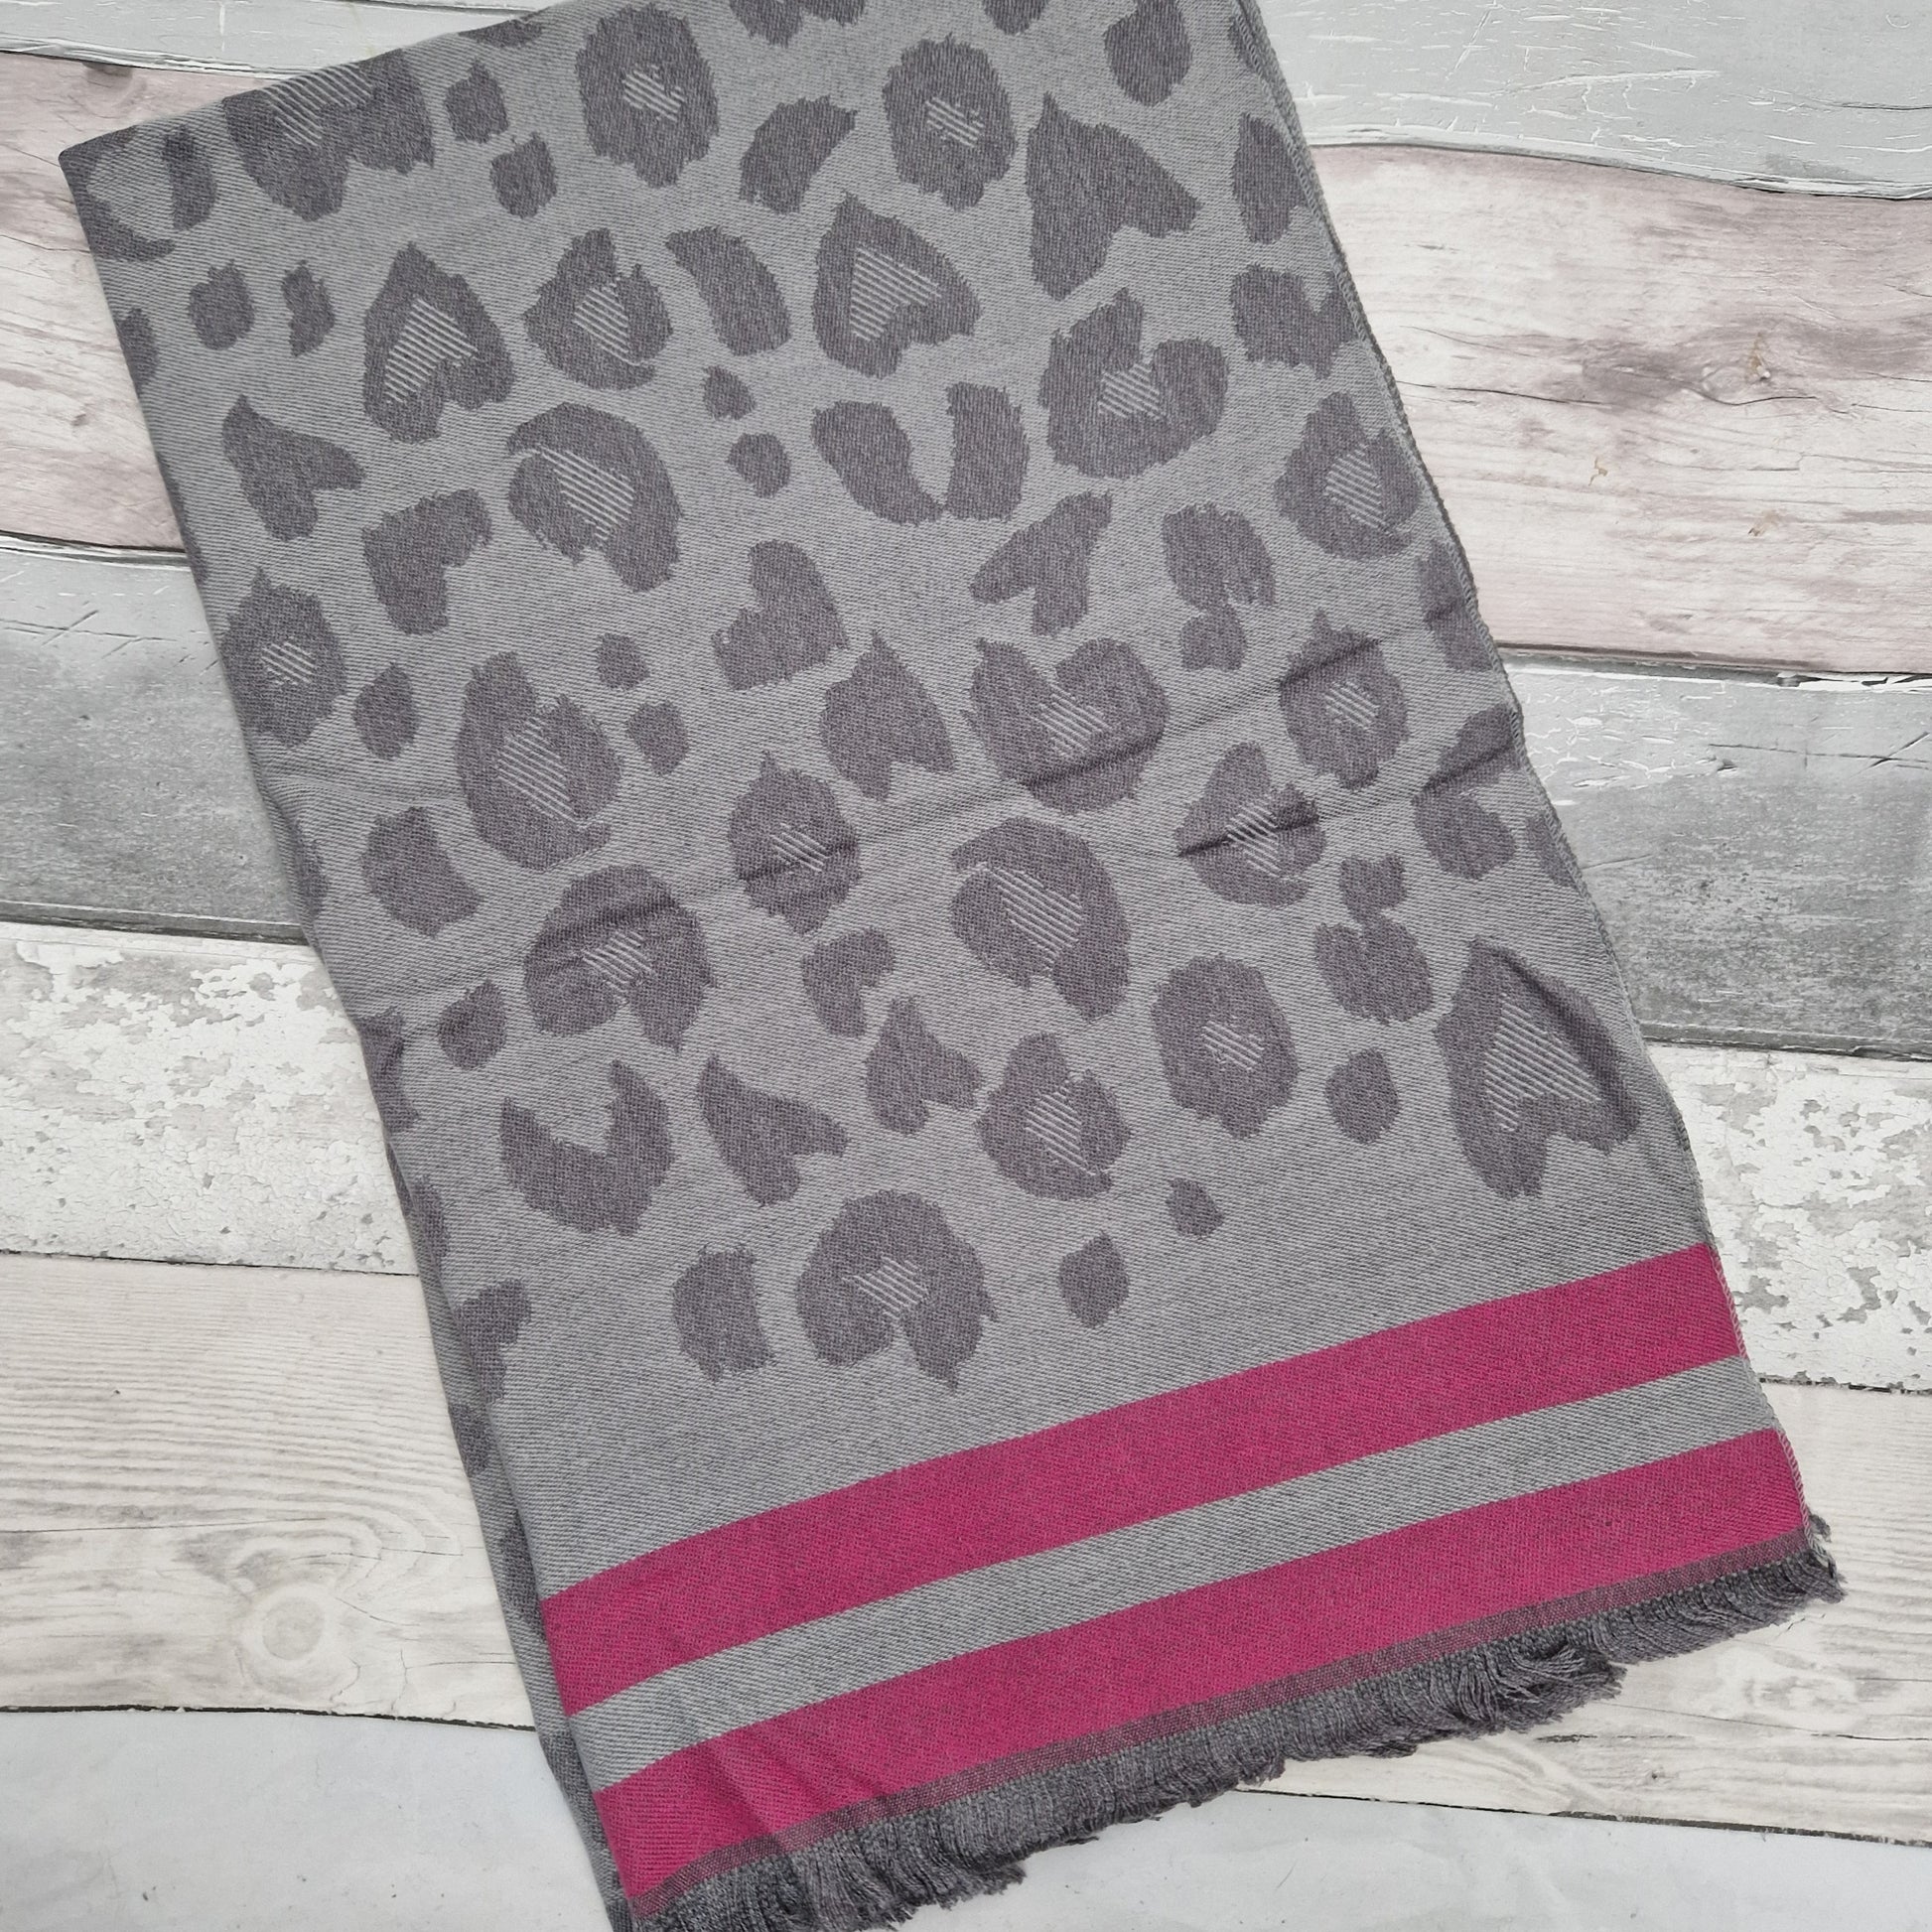 Silver grey leopard print scarf finished with a pink trim.